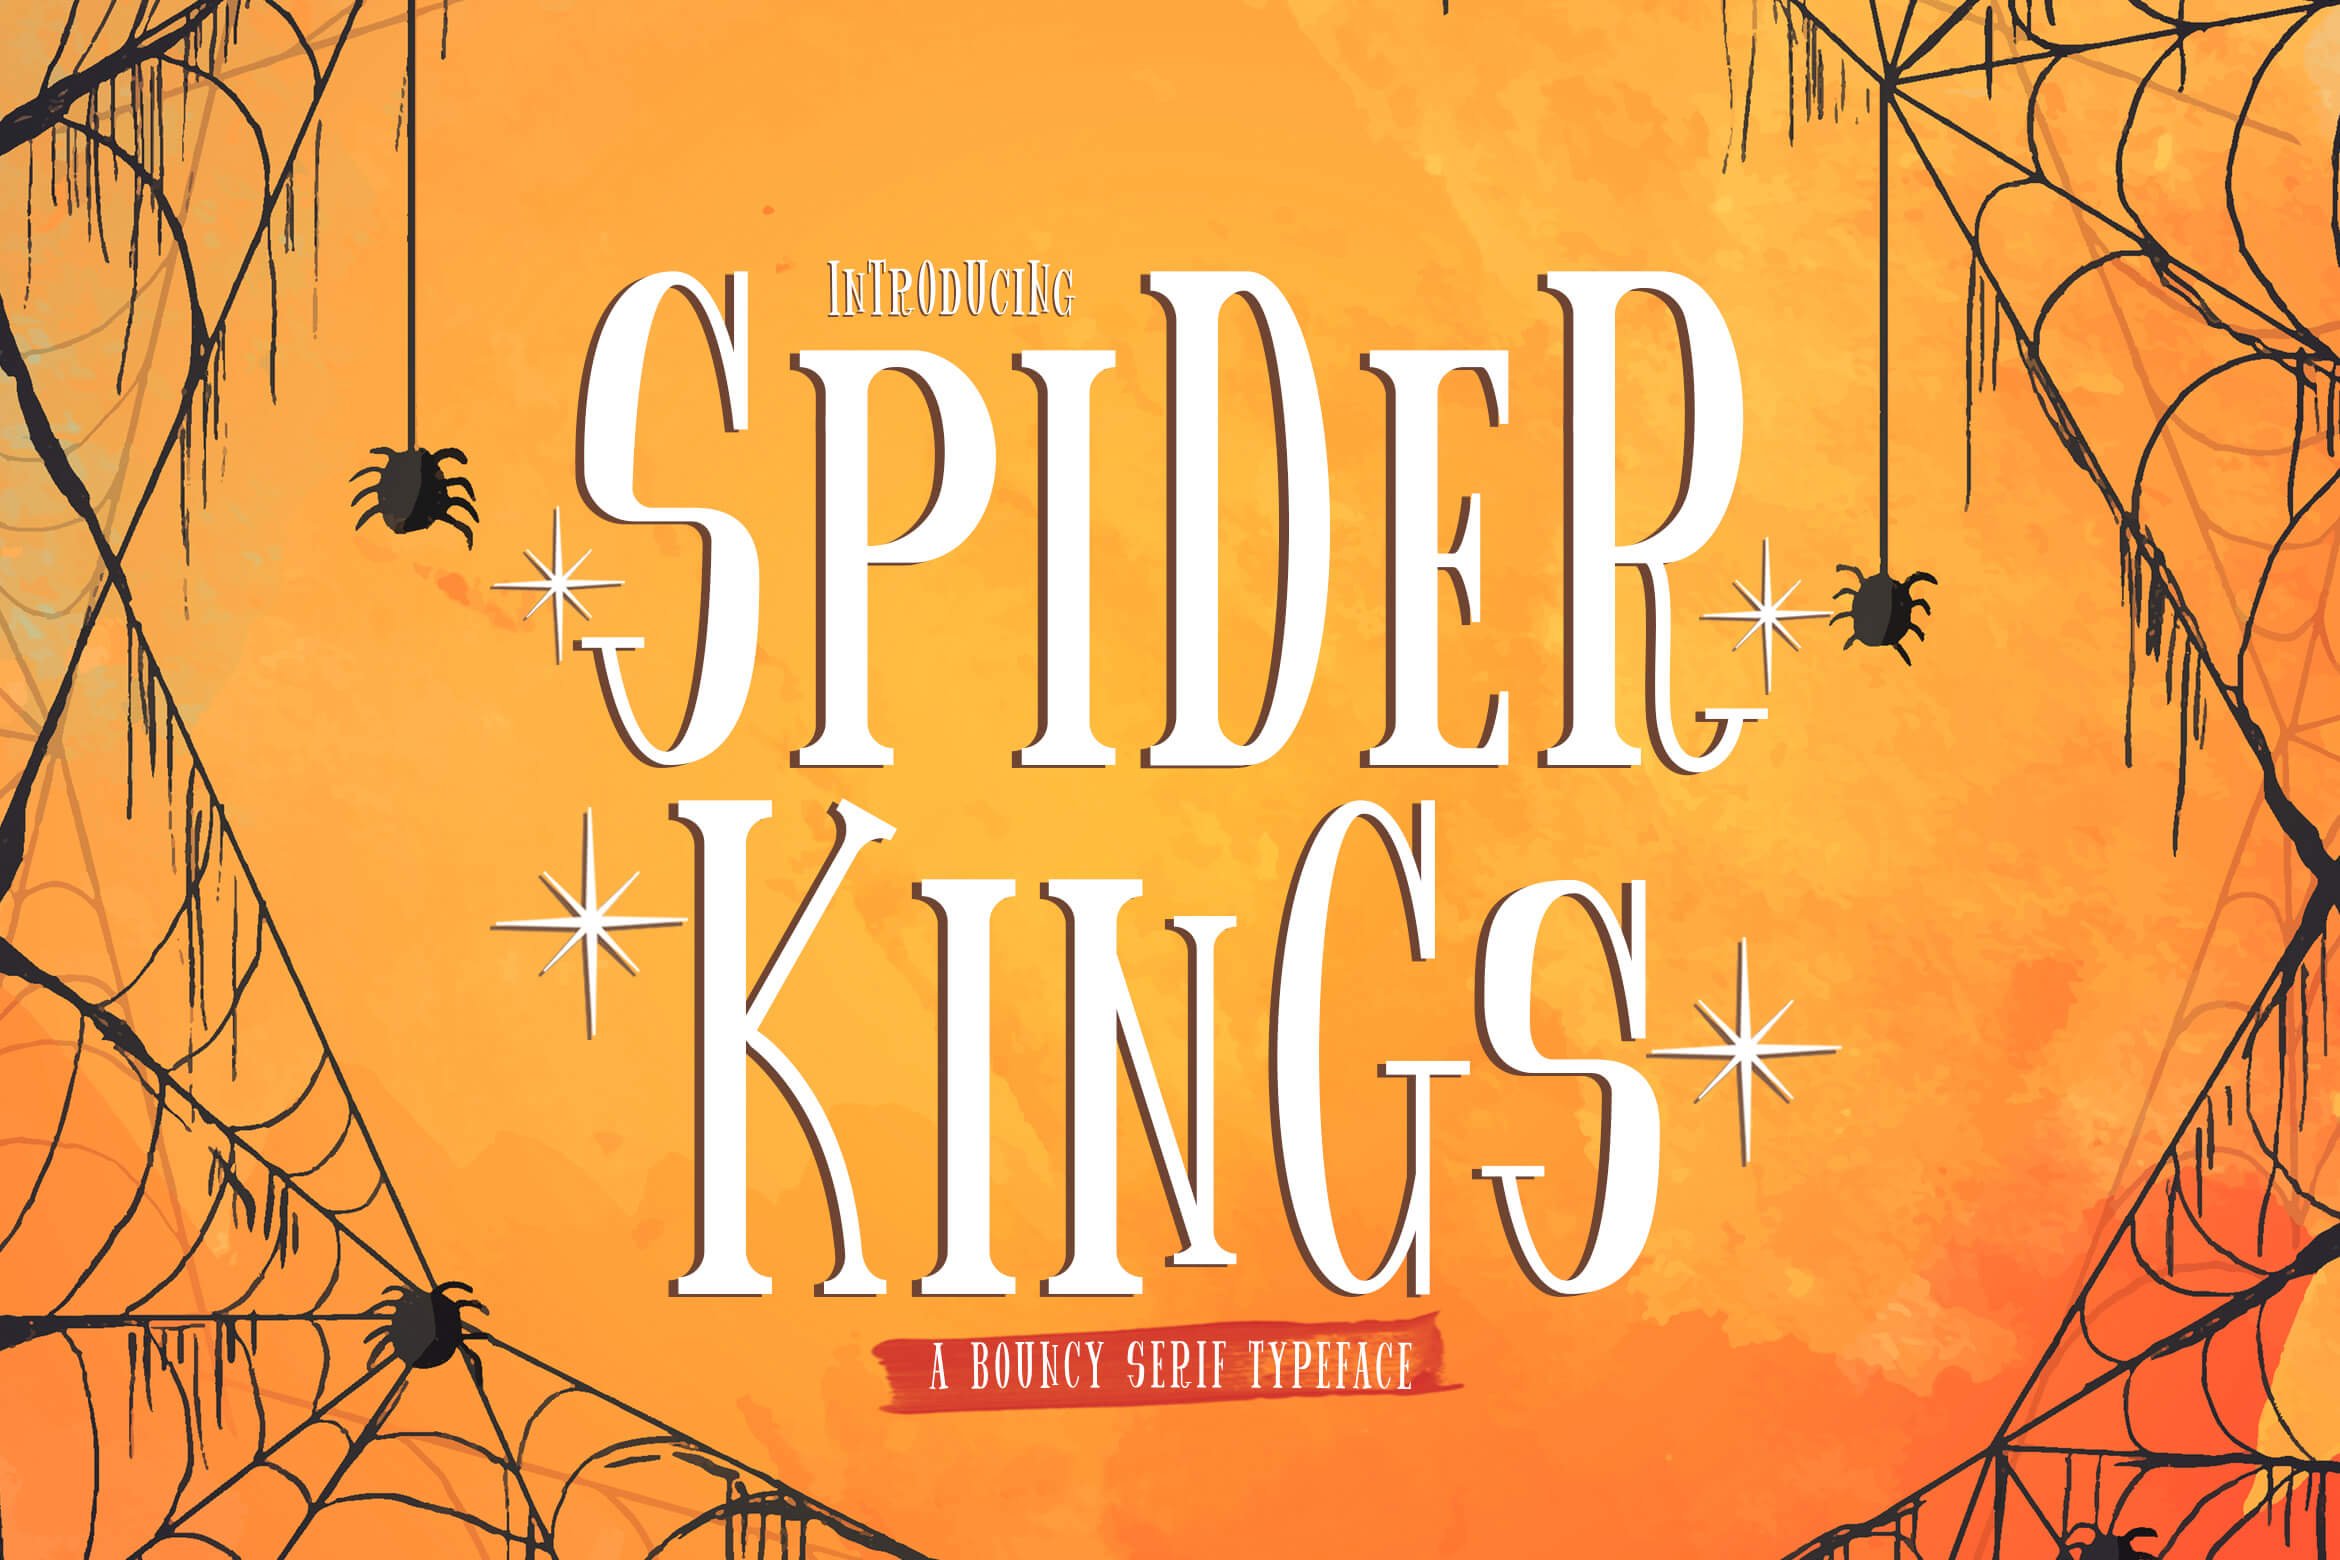 Spider King - Bouncy Serif Font cover image.